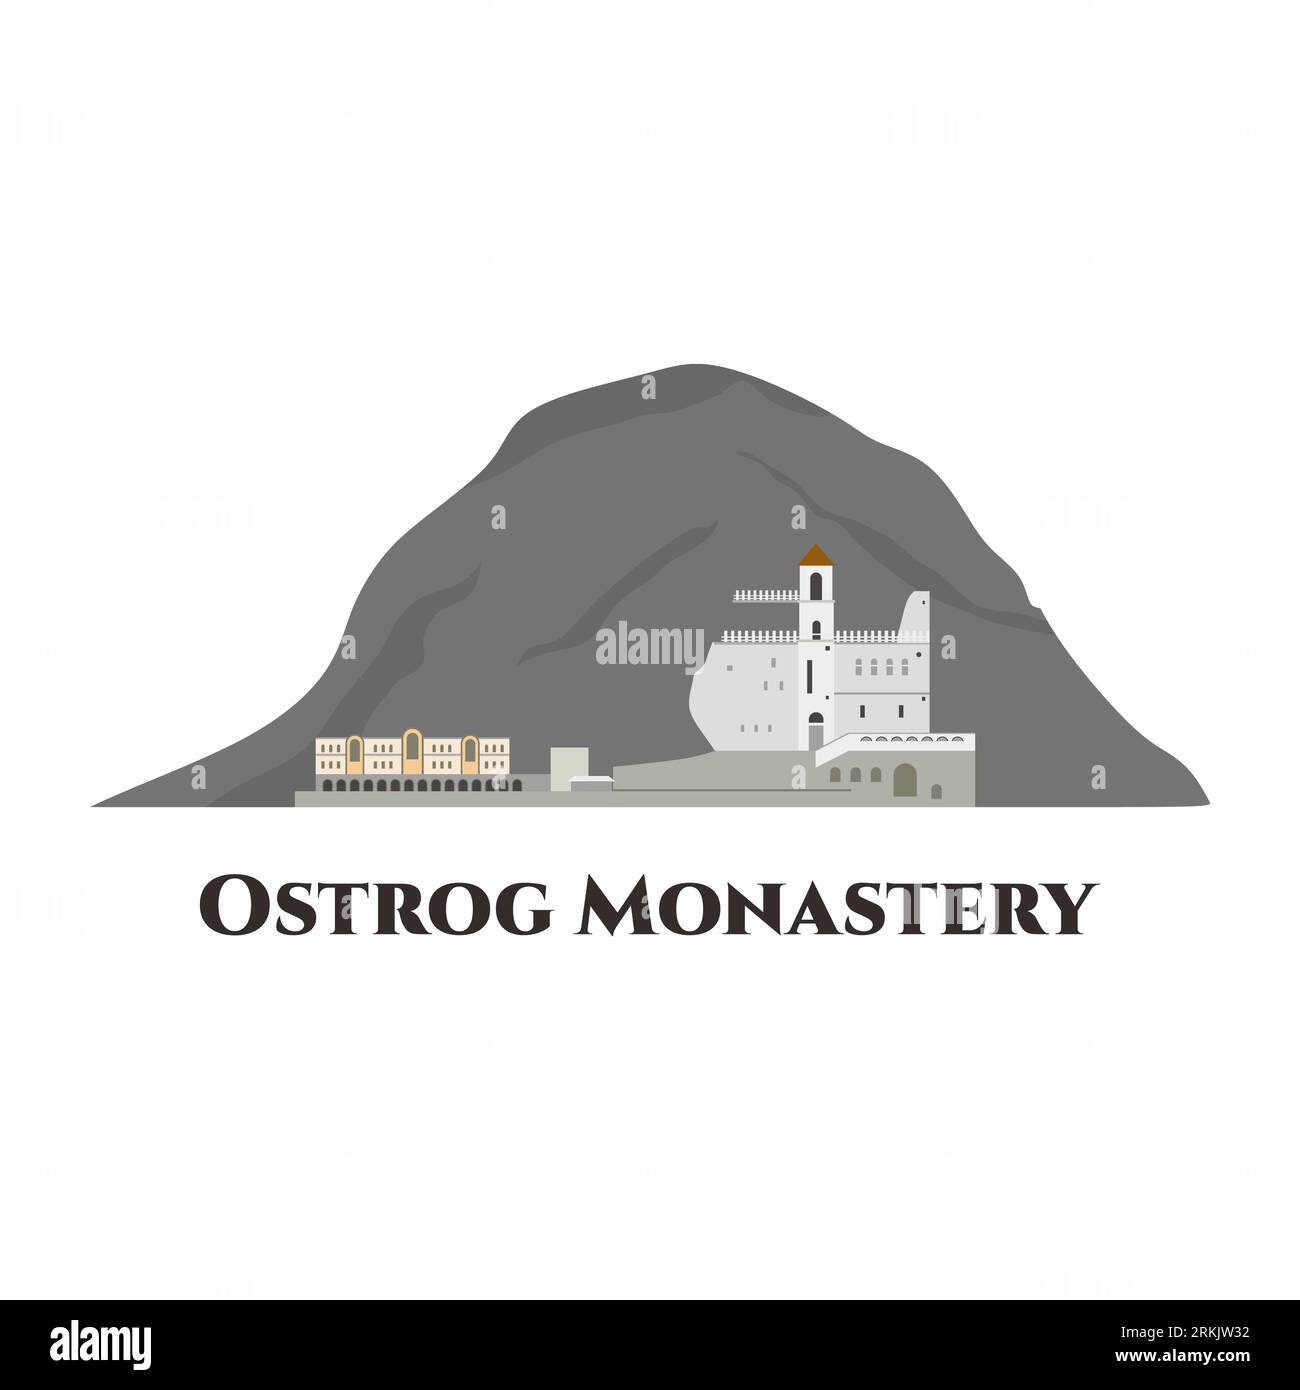 The Ostrog Monastery. Great architecture and culture. A must-visit. Travel to Montenegro, infographic poster, banner concept design. Cartoon landmark Stock Vector